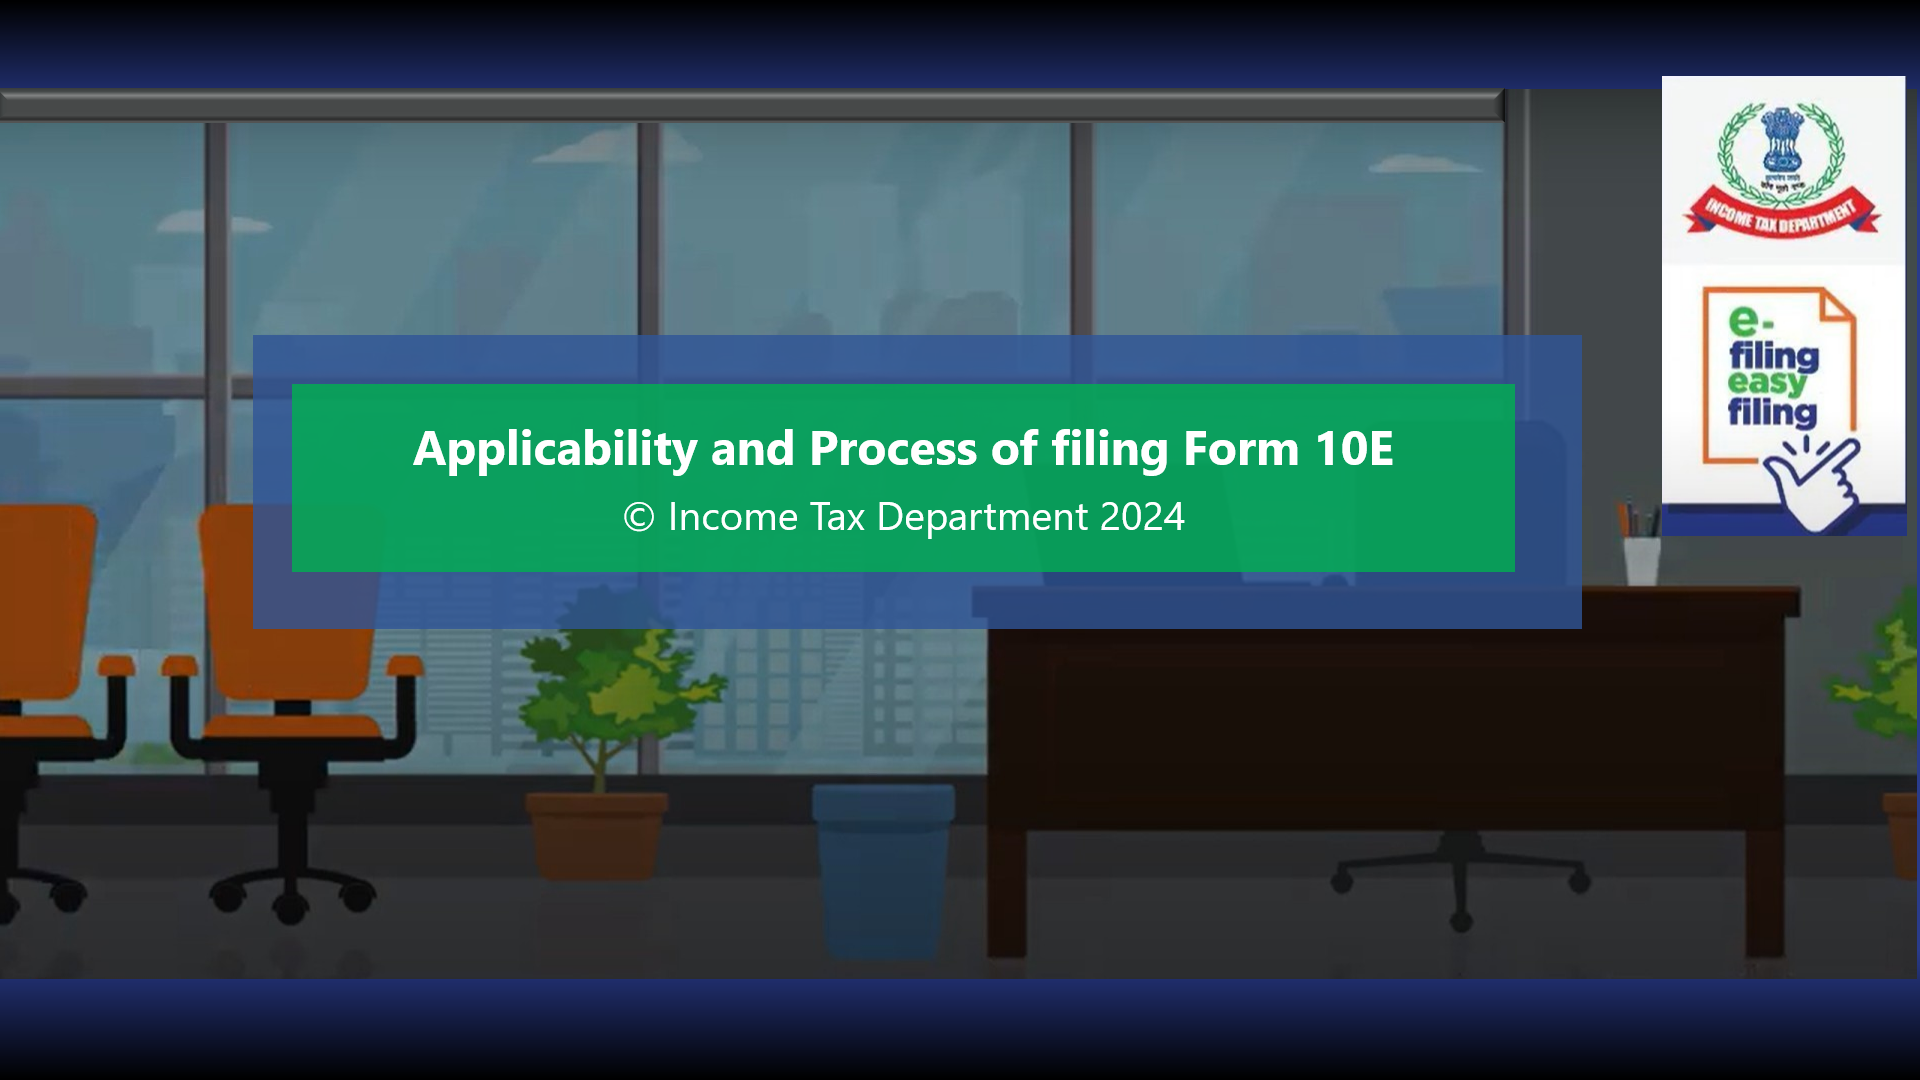 Applicability and Process of filing Form 10E